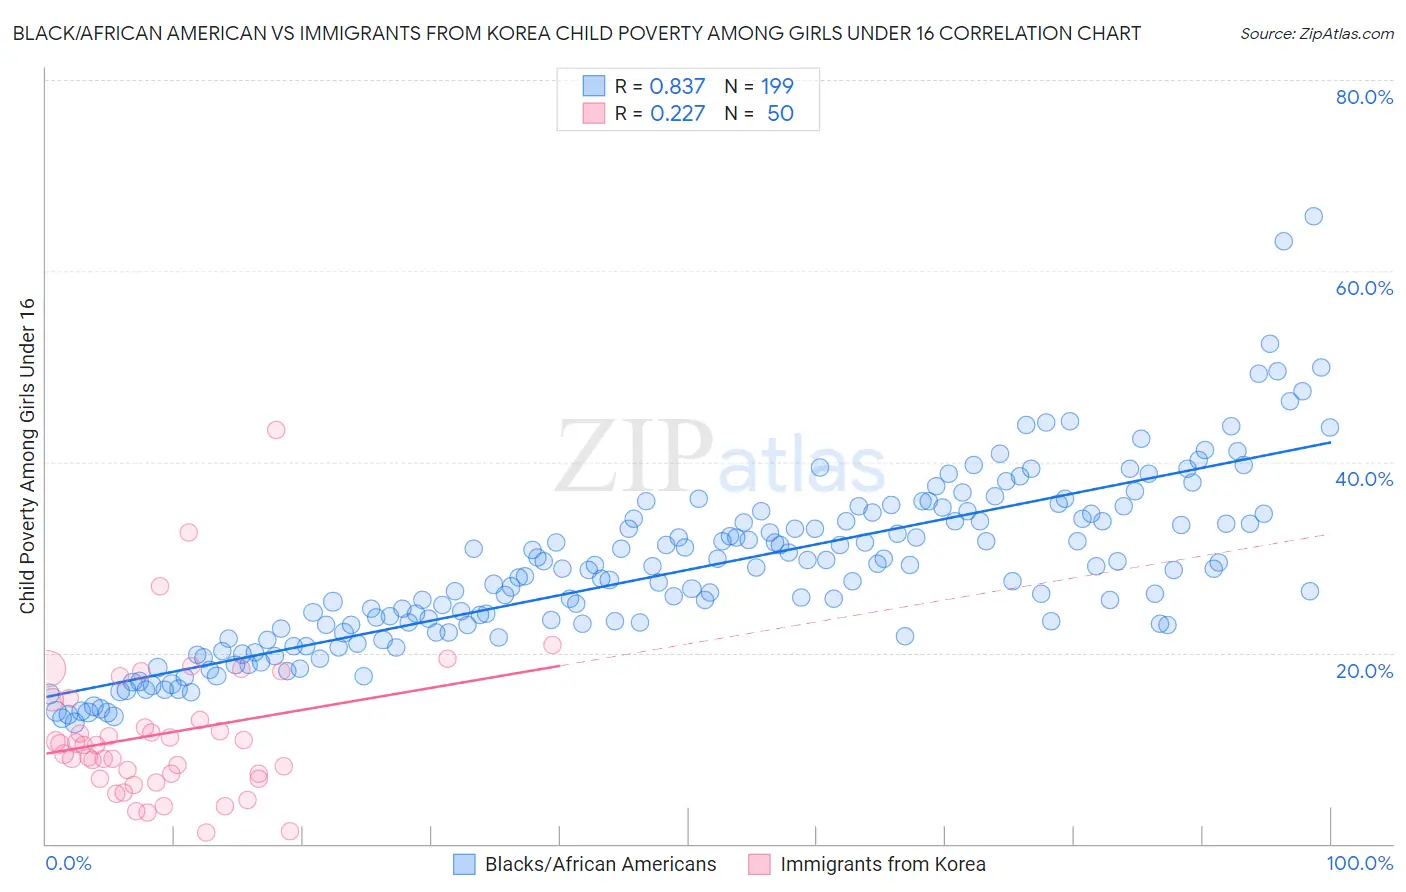 Black/African American vs Immigrants from Korea Child Poverty Among Girls Under 16